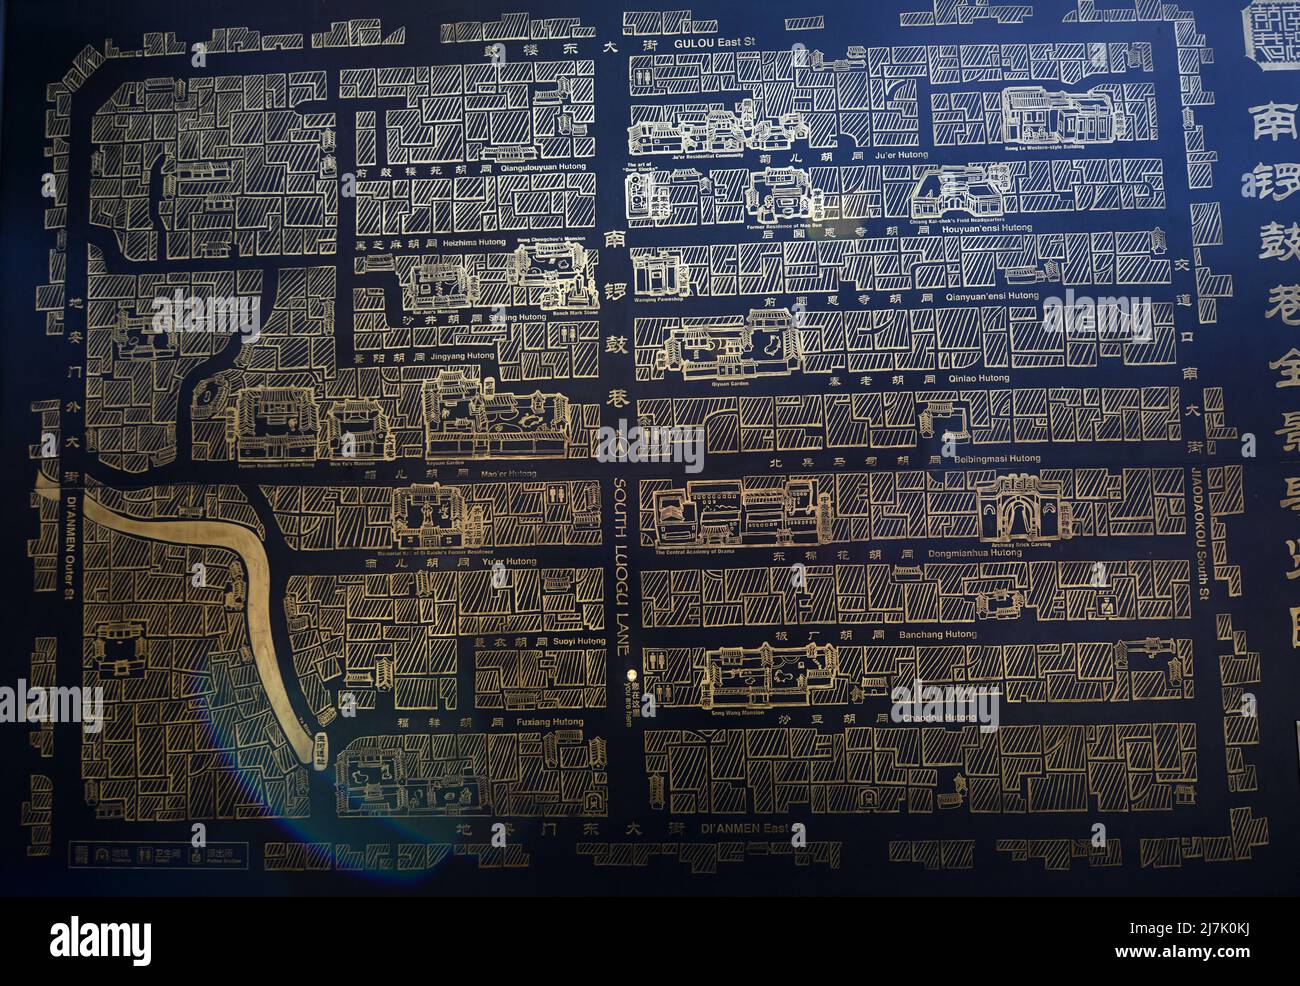 Map of the South Luogu lane and the old hutong neighborhoods in Doncheng district in Beijing, China. Stock Photo